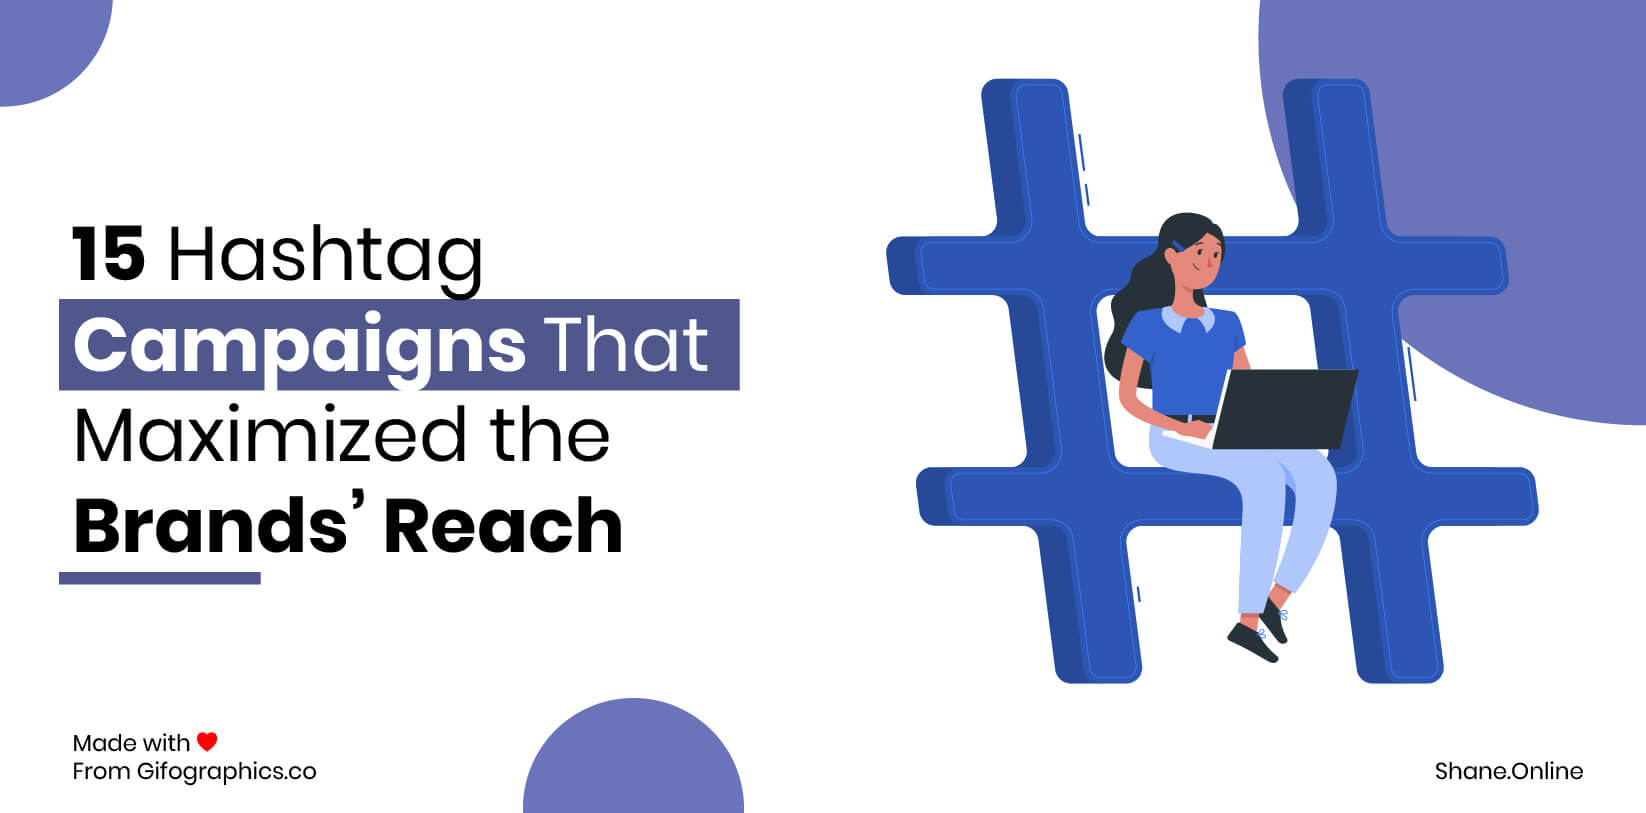 15 hashtag campaigns that maximized the brands’ reach